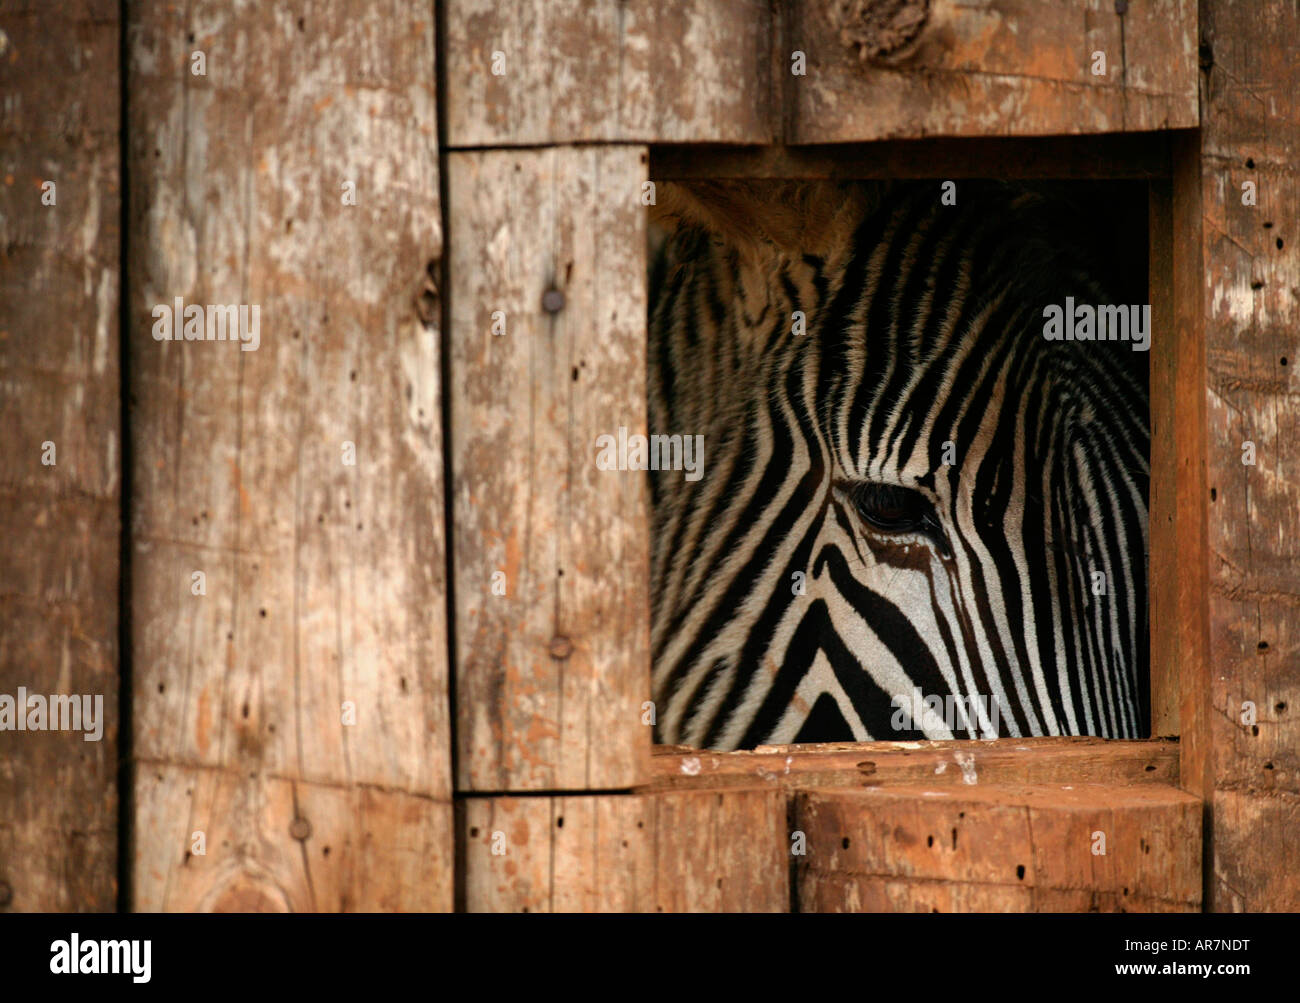 A zebra, also known as Equus zebra zebra, is pictured at the Cabarceno nature reserve, near Santander, in northern Spain Stock Photo